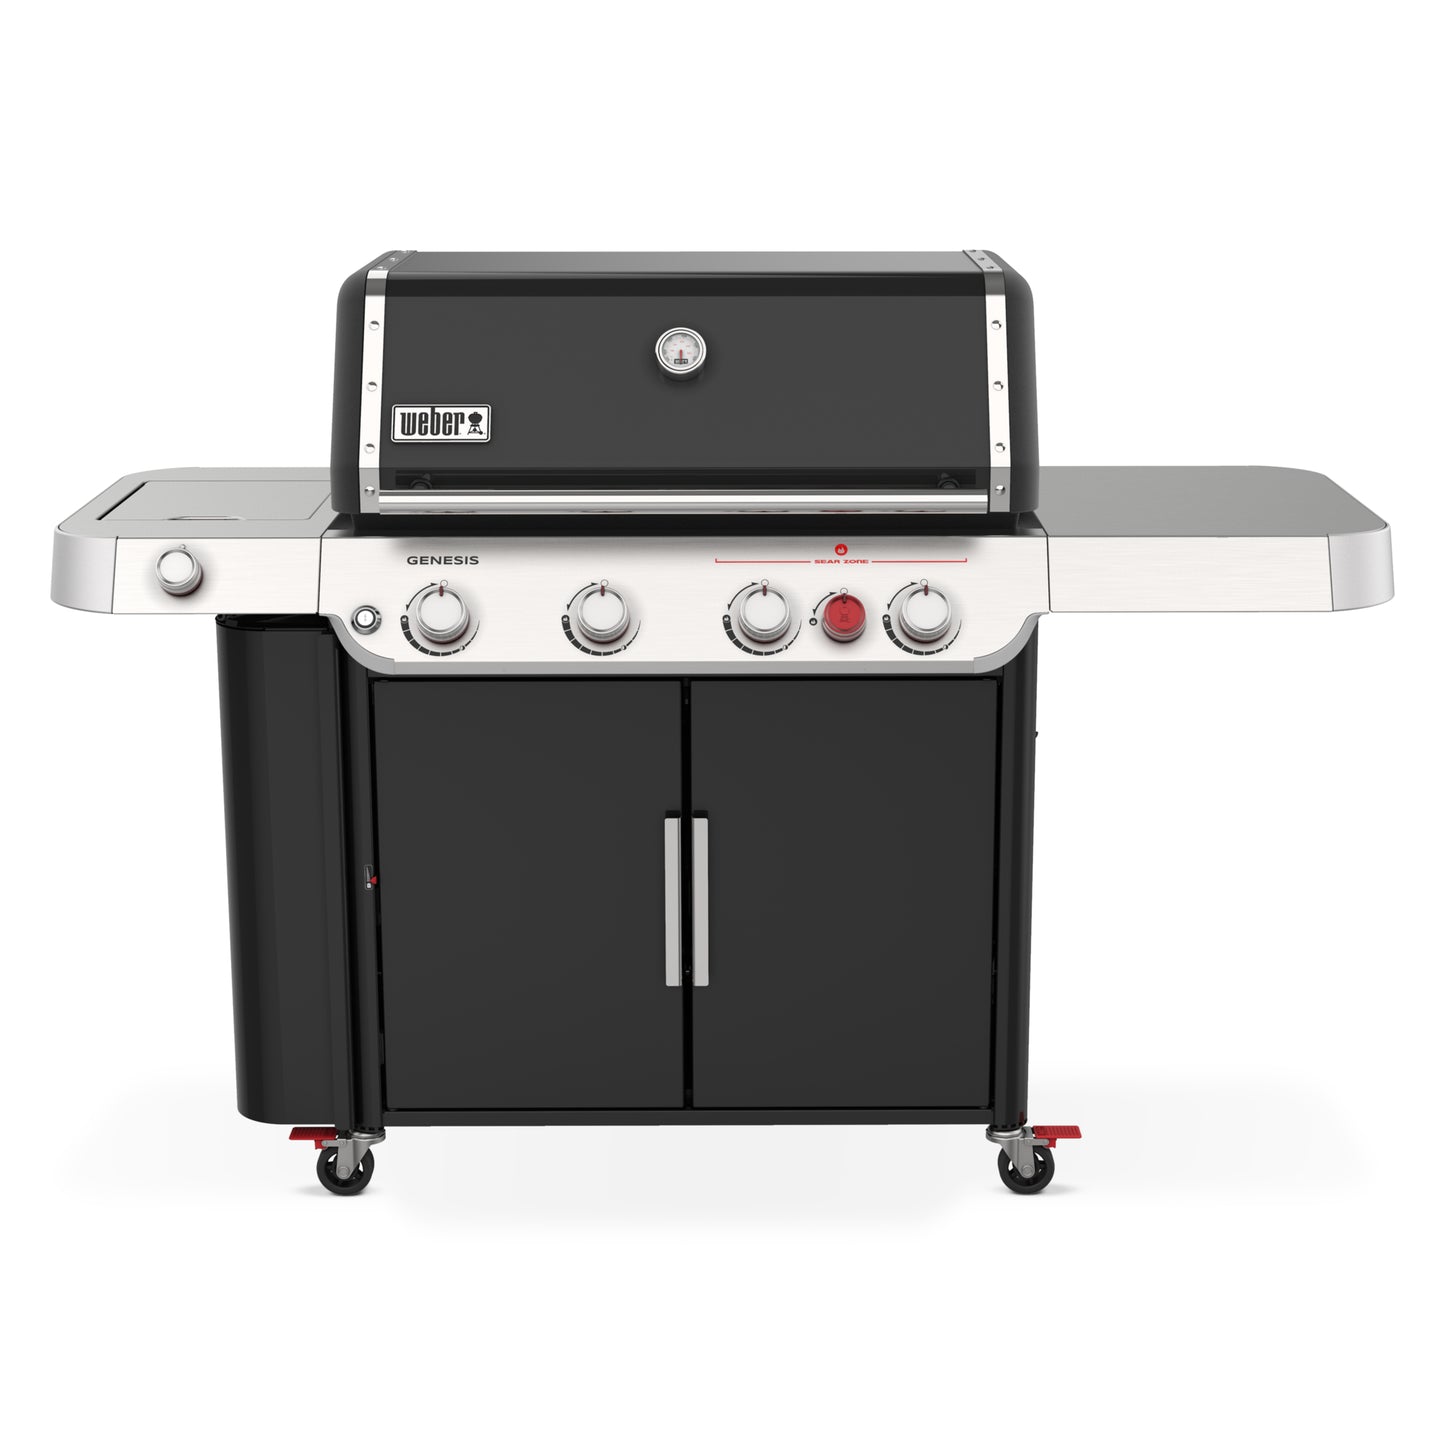 Weber Genesis E-435 Gas Grill with Side Burner and Sear Zone